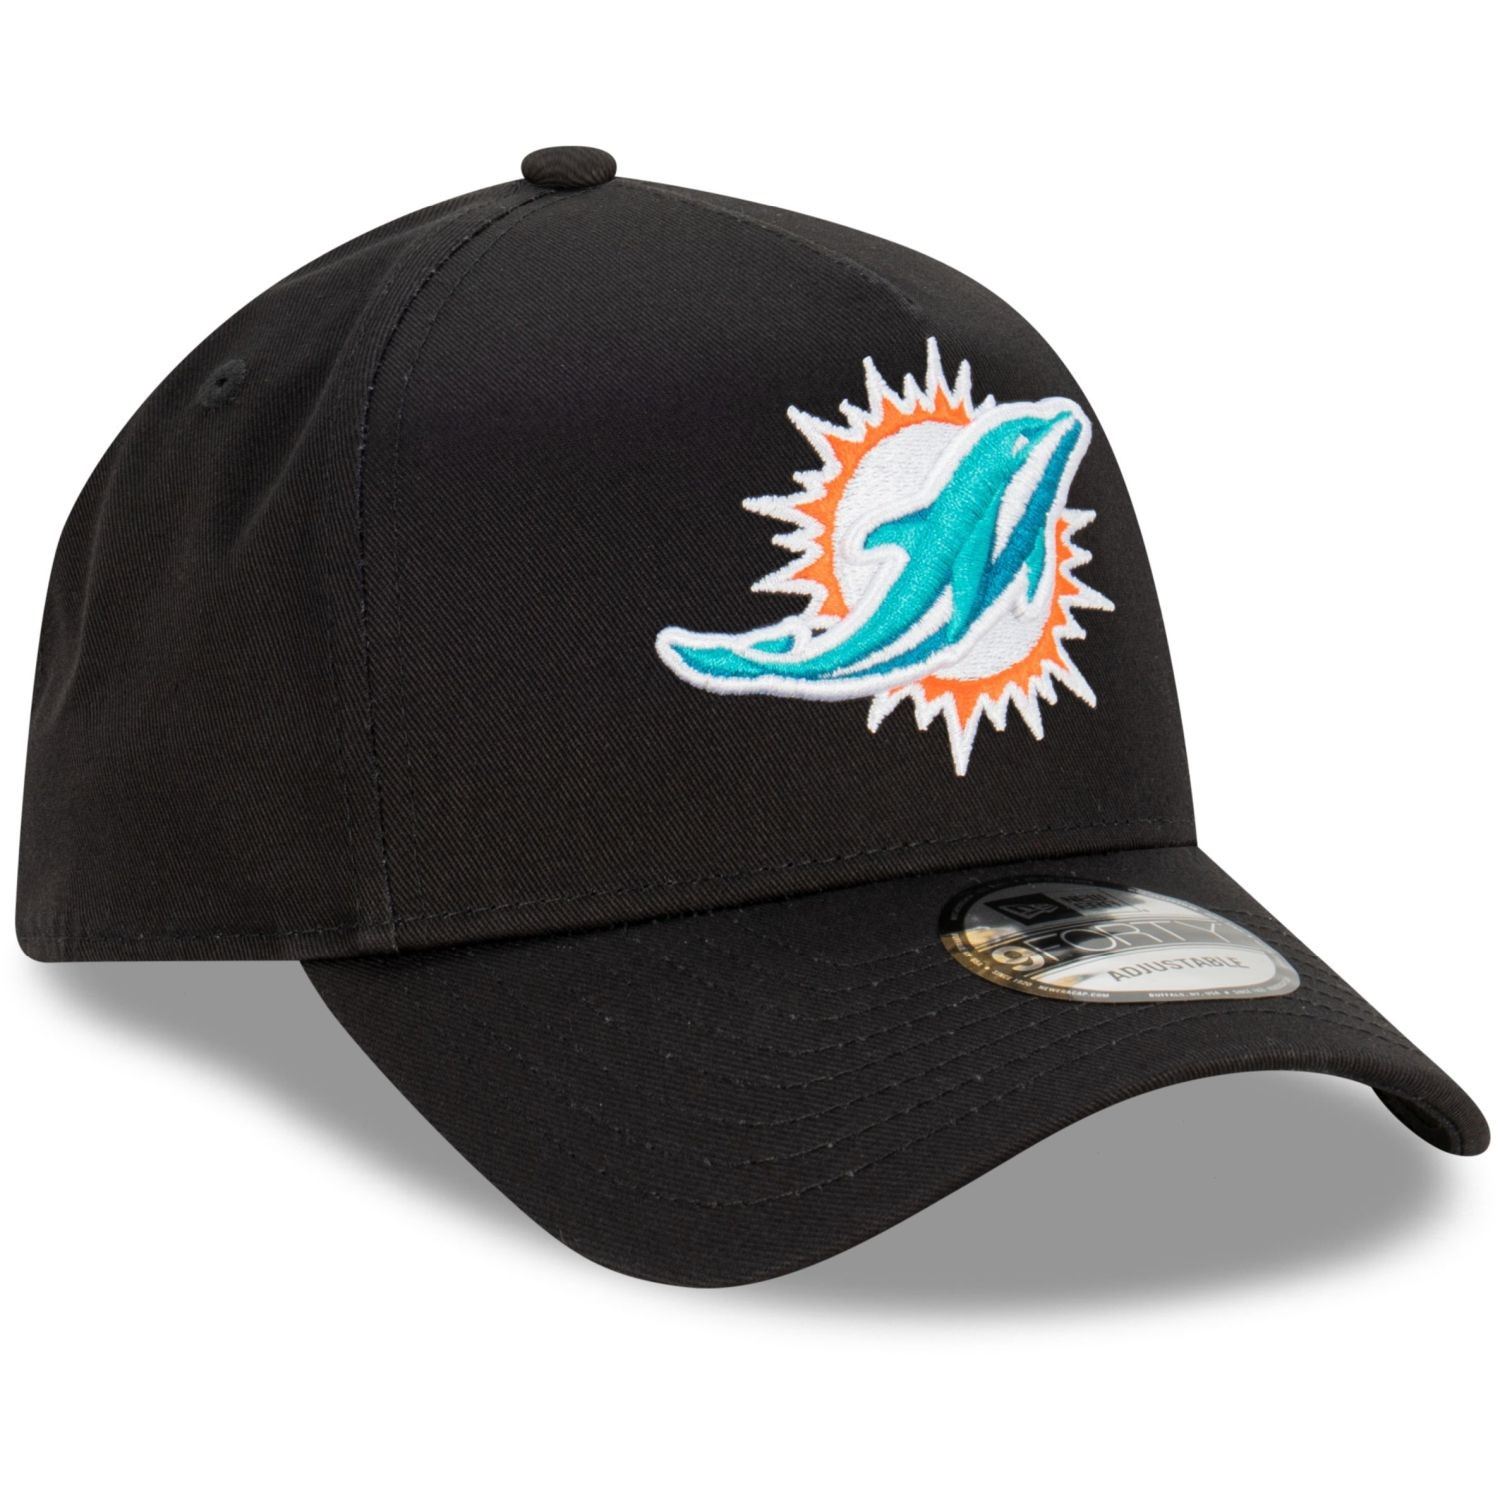 Miami Dolphins NFL Evergreen Black 9Forty Adjustable A-Frame Cap New Era